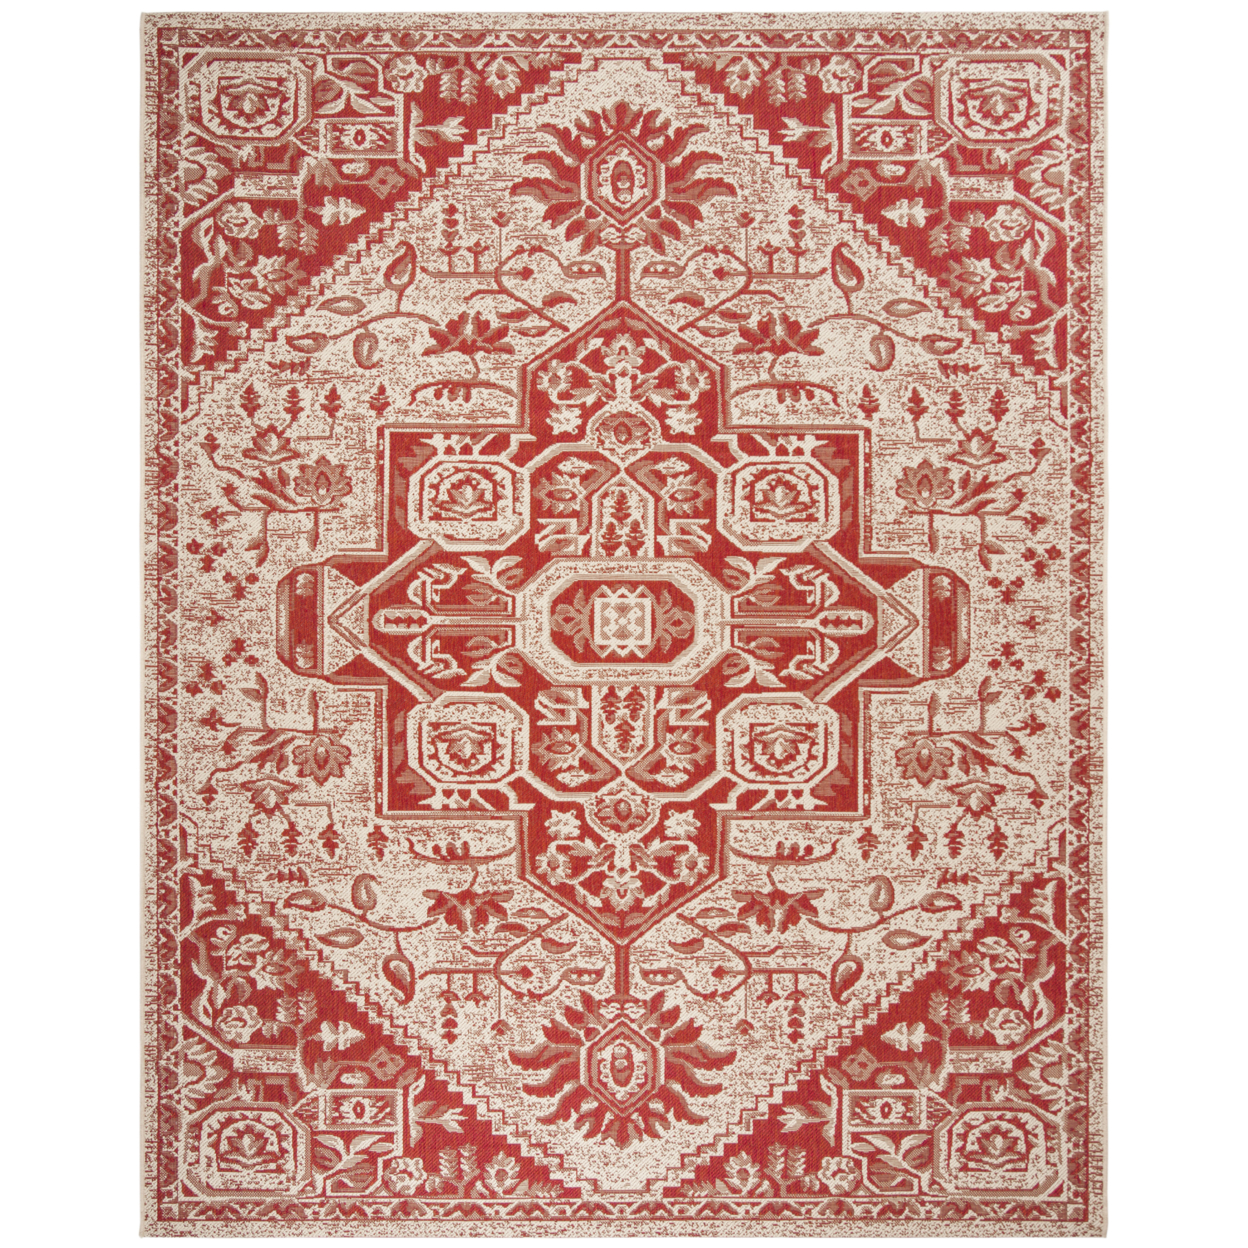 SAFAVIEH Outdoor LND138Q Linden Collection Red / Creme Rug - image 4 of 10